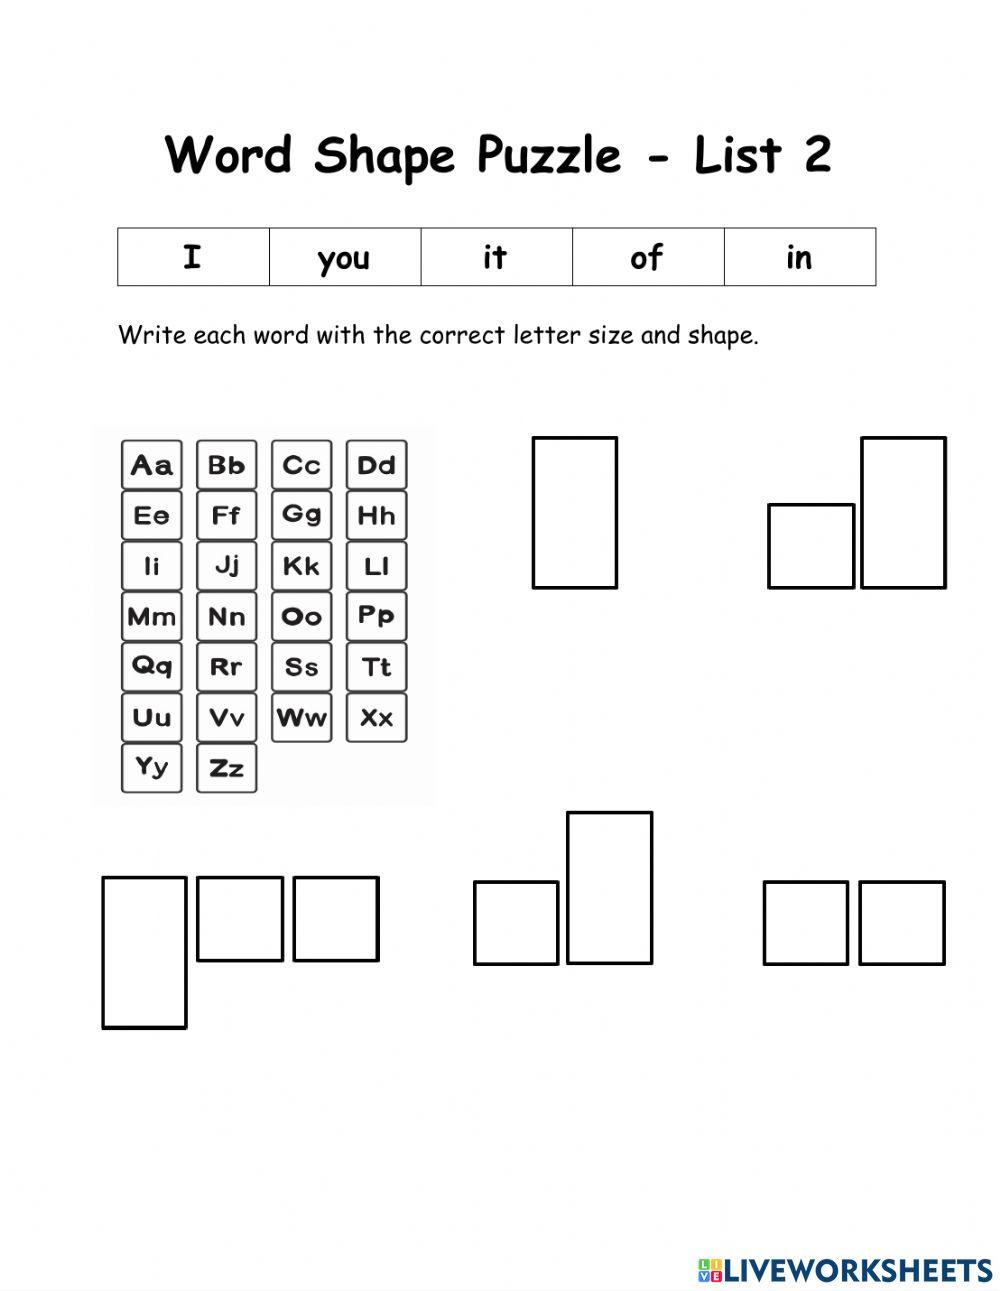 WOW - 5 Words - List 2 - Word Shape Puzzle